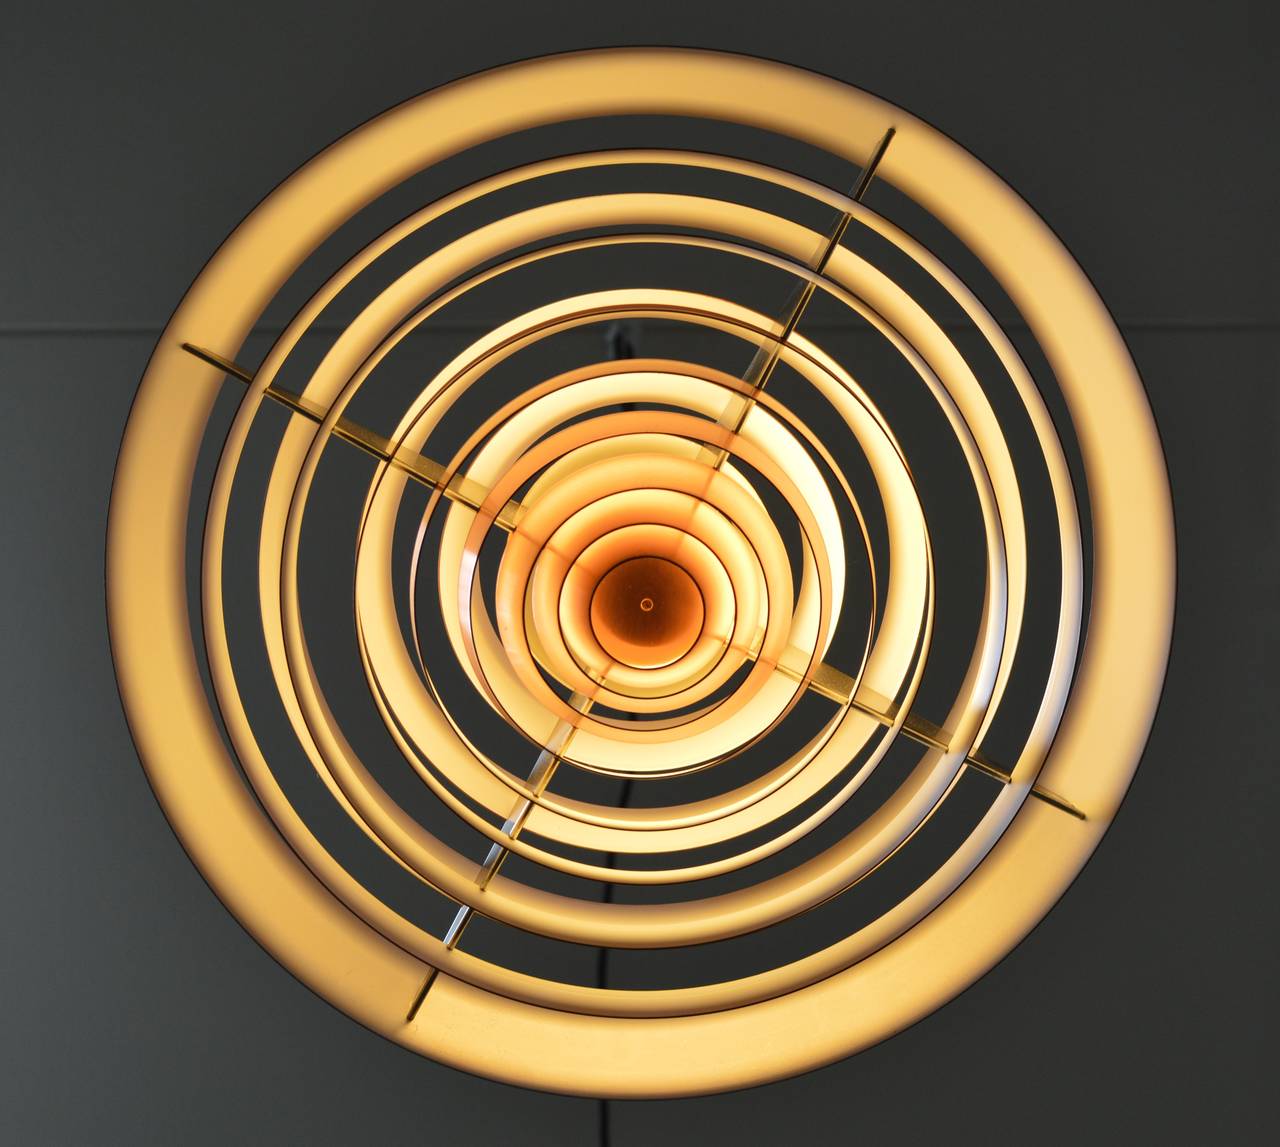 Beautiful copper Langelinie/Plate pendant by Poul Henningsen for Louis Poulsen originally designed in 1958 for the Langelinie Pavilion in Copenhagen and inspired by the pattern of rings in the water surrounding the Pavilion.
This lamp was produced